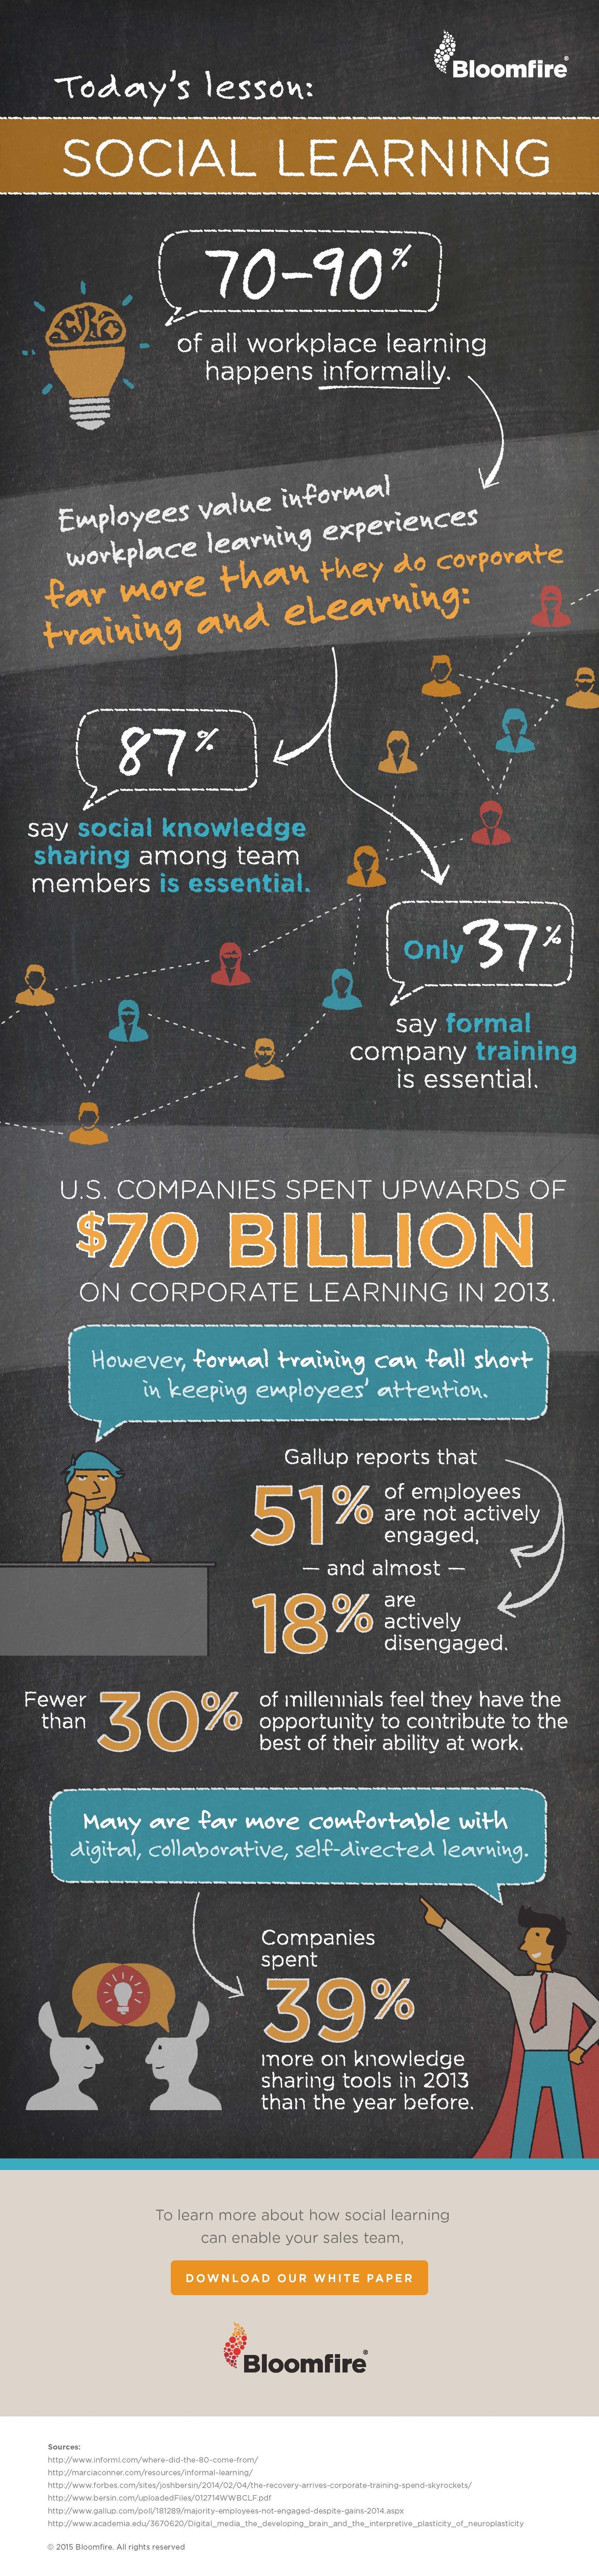 The Importance of Social Learning for Companies Infographic